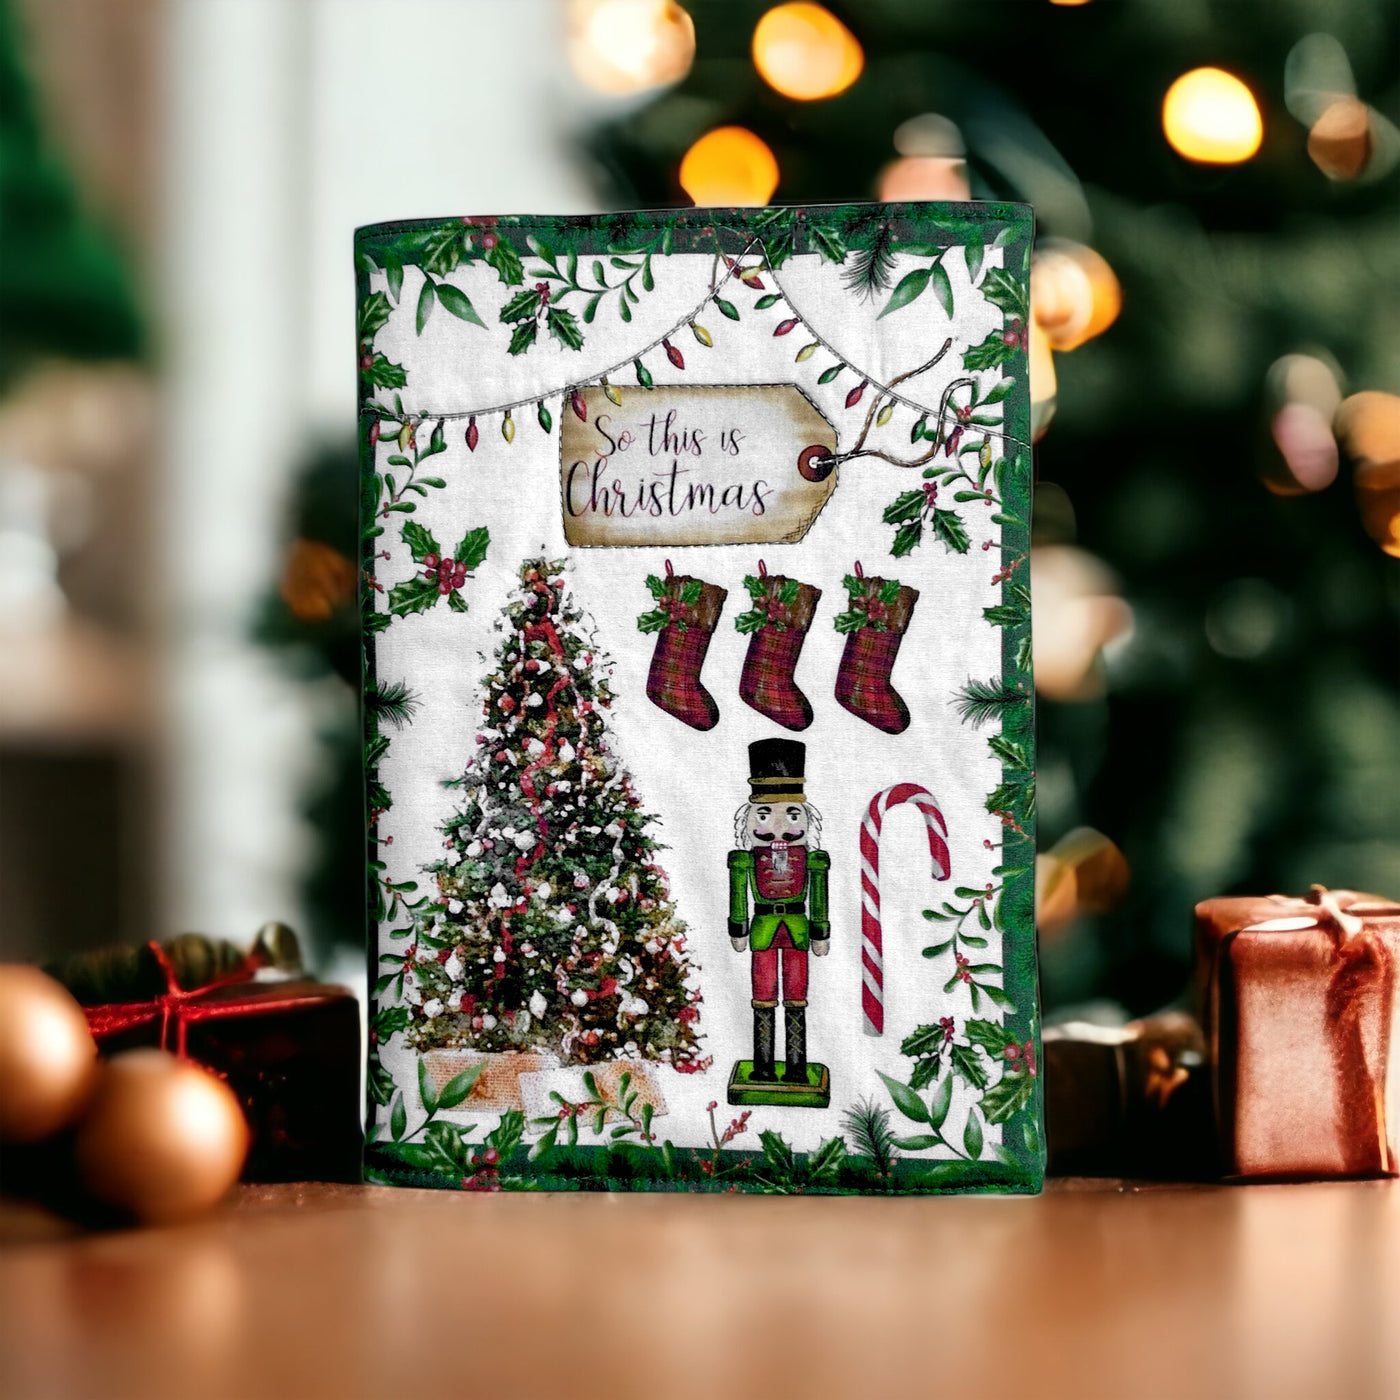 The Book Cover – Christmas Notes Kit